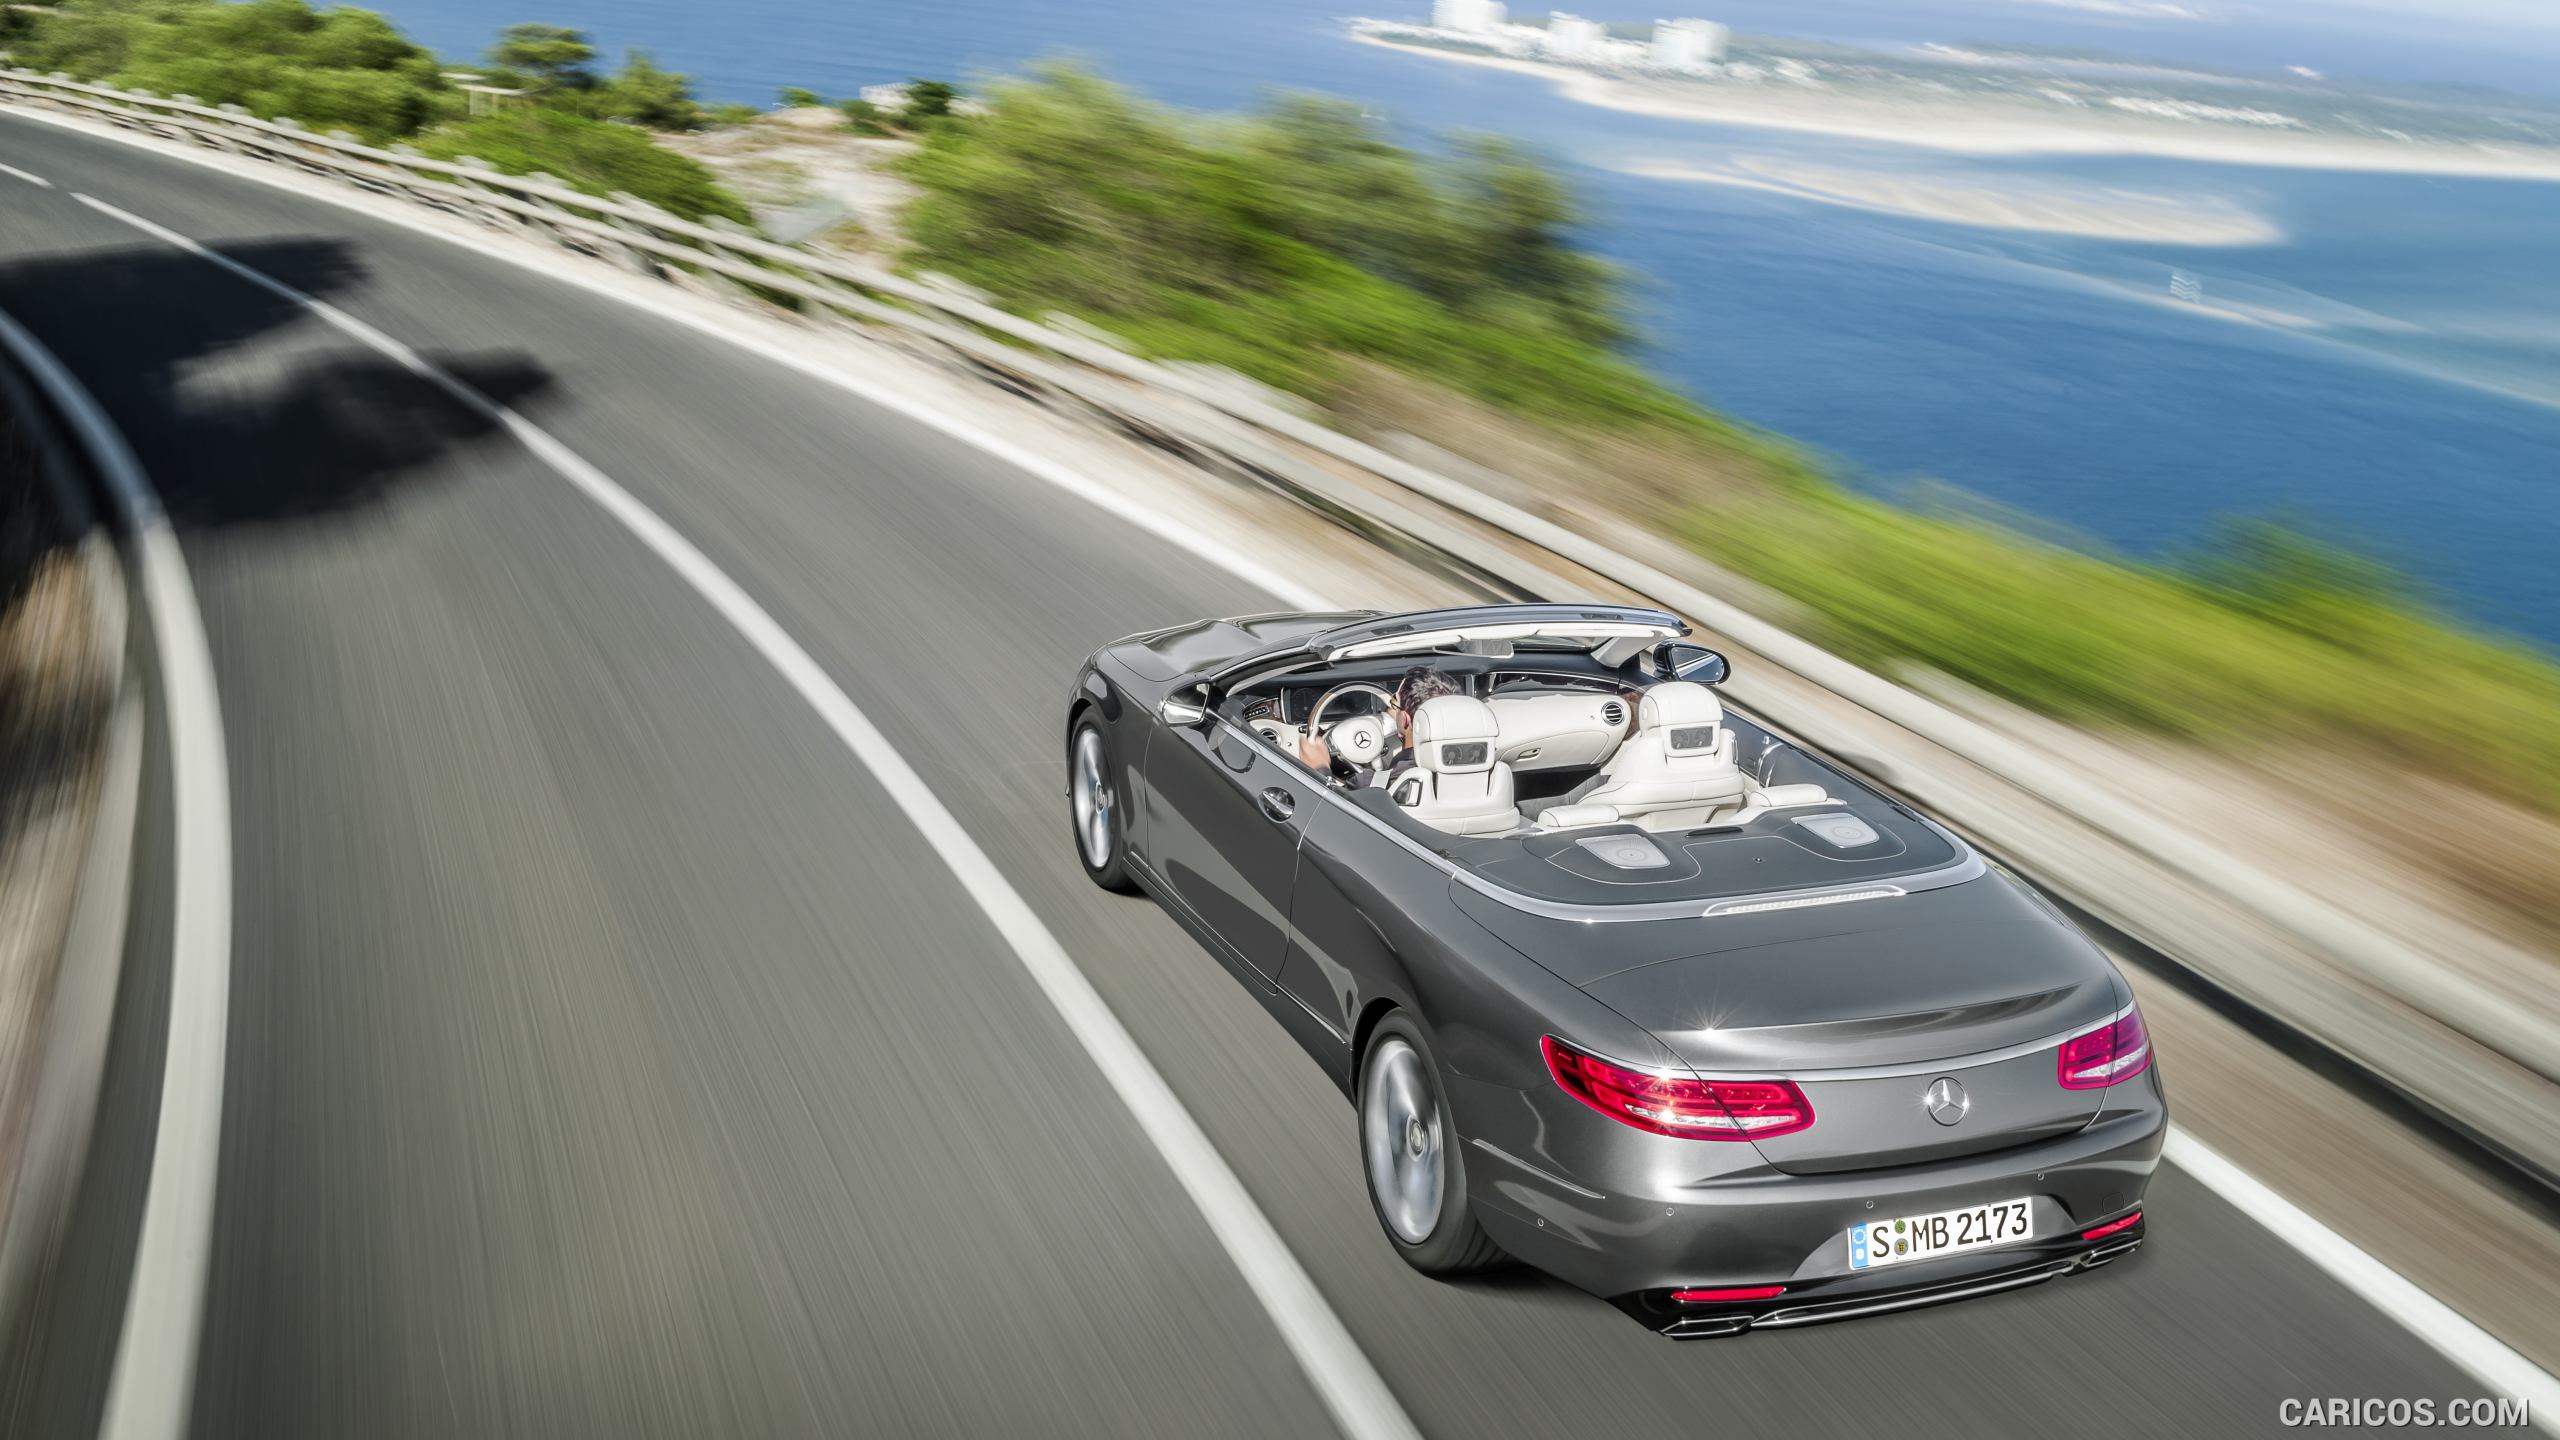 2017 Mercedes-Benz S-Class S500 Cabriolet (Selenit Grey) - Rear, #7 of 56